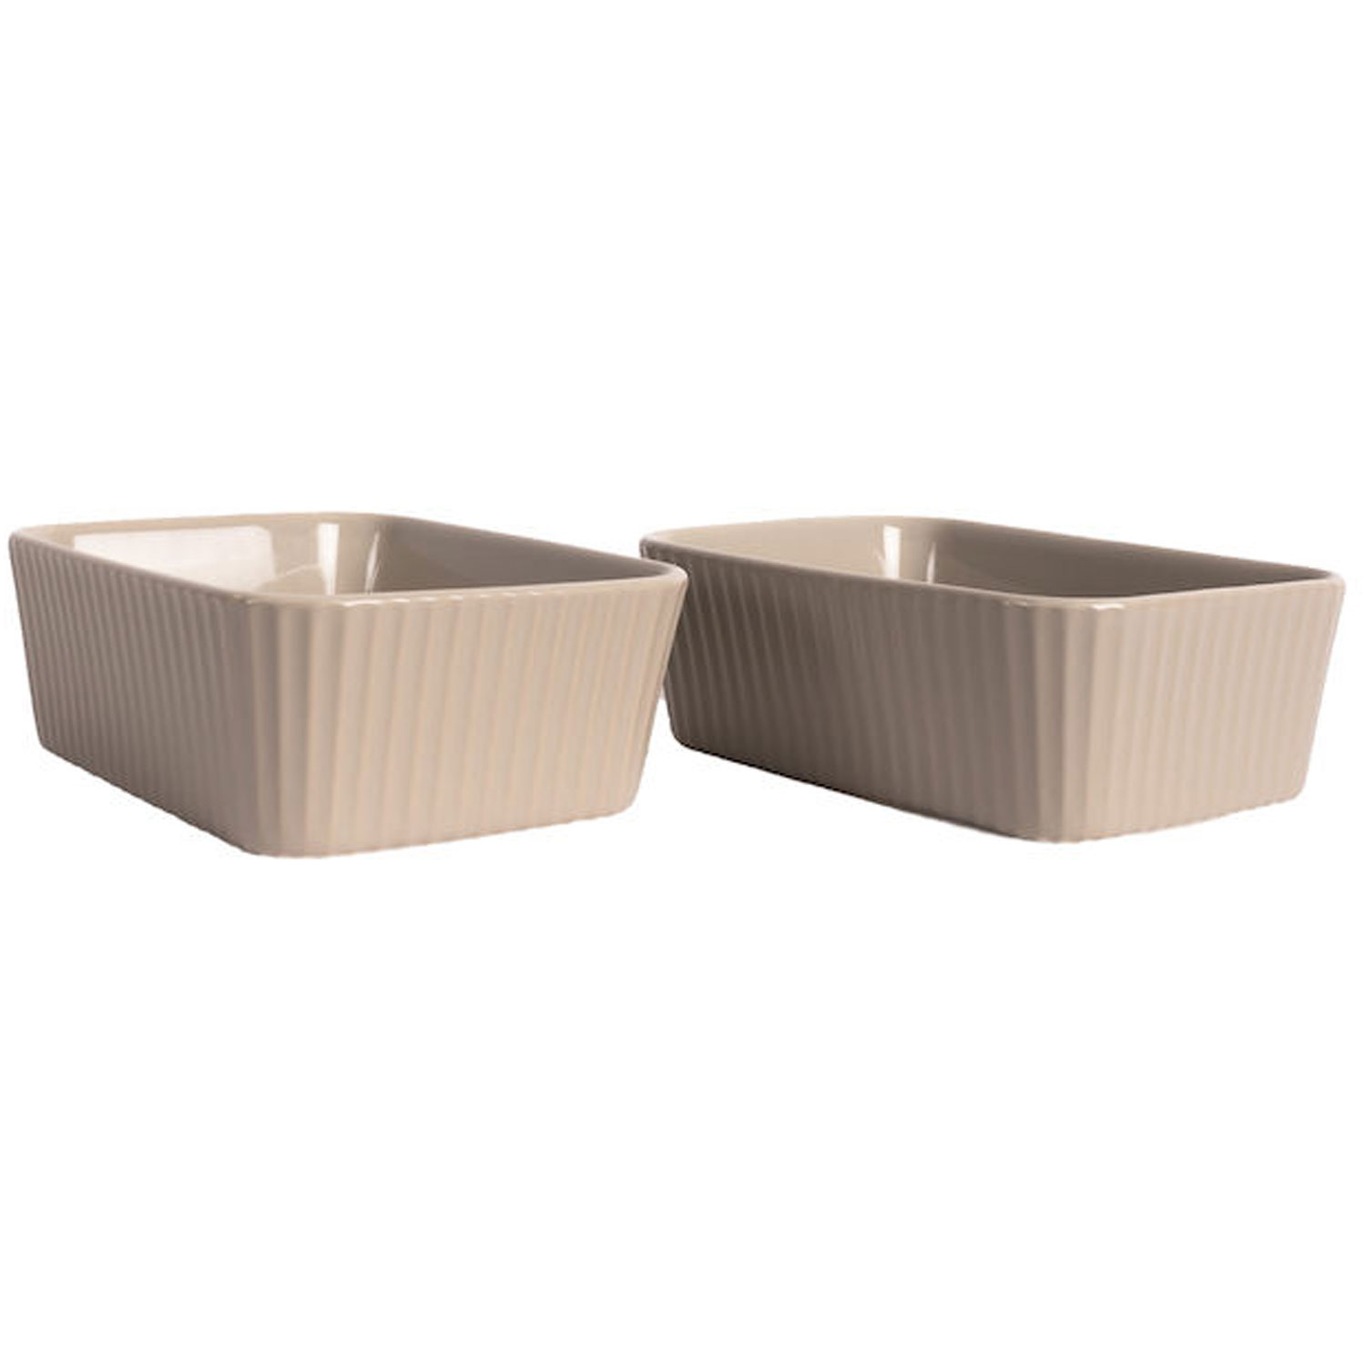 Flora Oven Dishes 2-pack, Beige